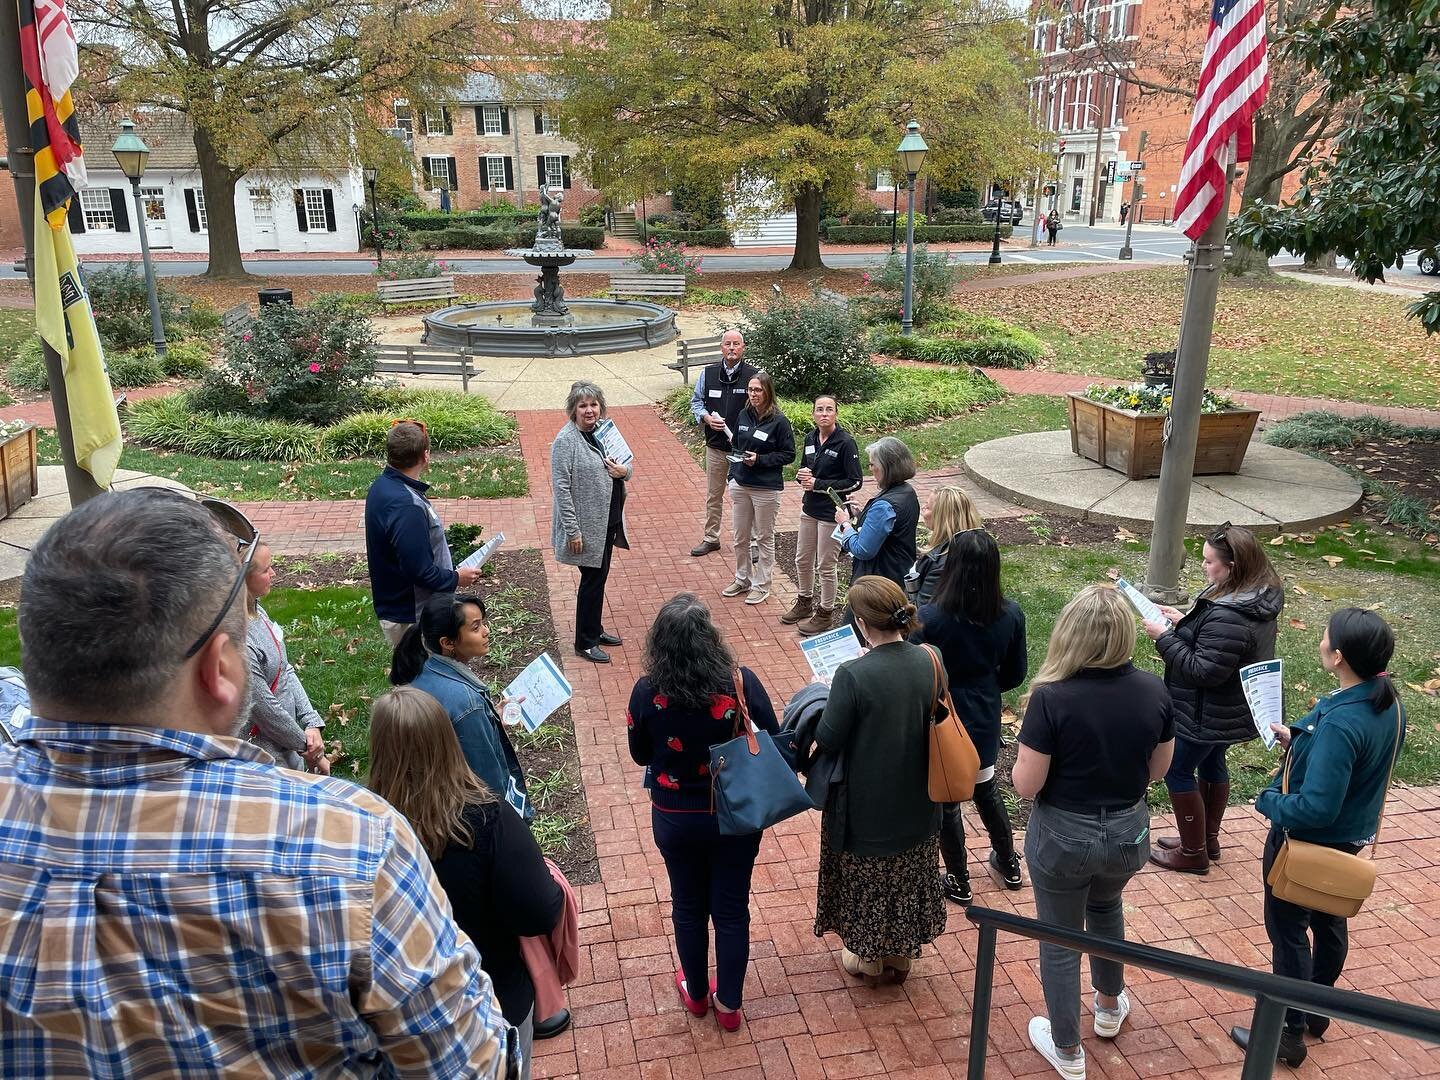 Last week we had the pleasure of hosting CREW Maryland Suburban for a walking tour of The City of Frederick.
Led by our Economic Development team, the tour highlighted local adaptive reuse successes, as well as future commercial real estate &amp; dev